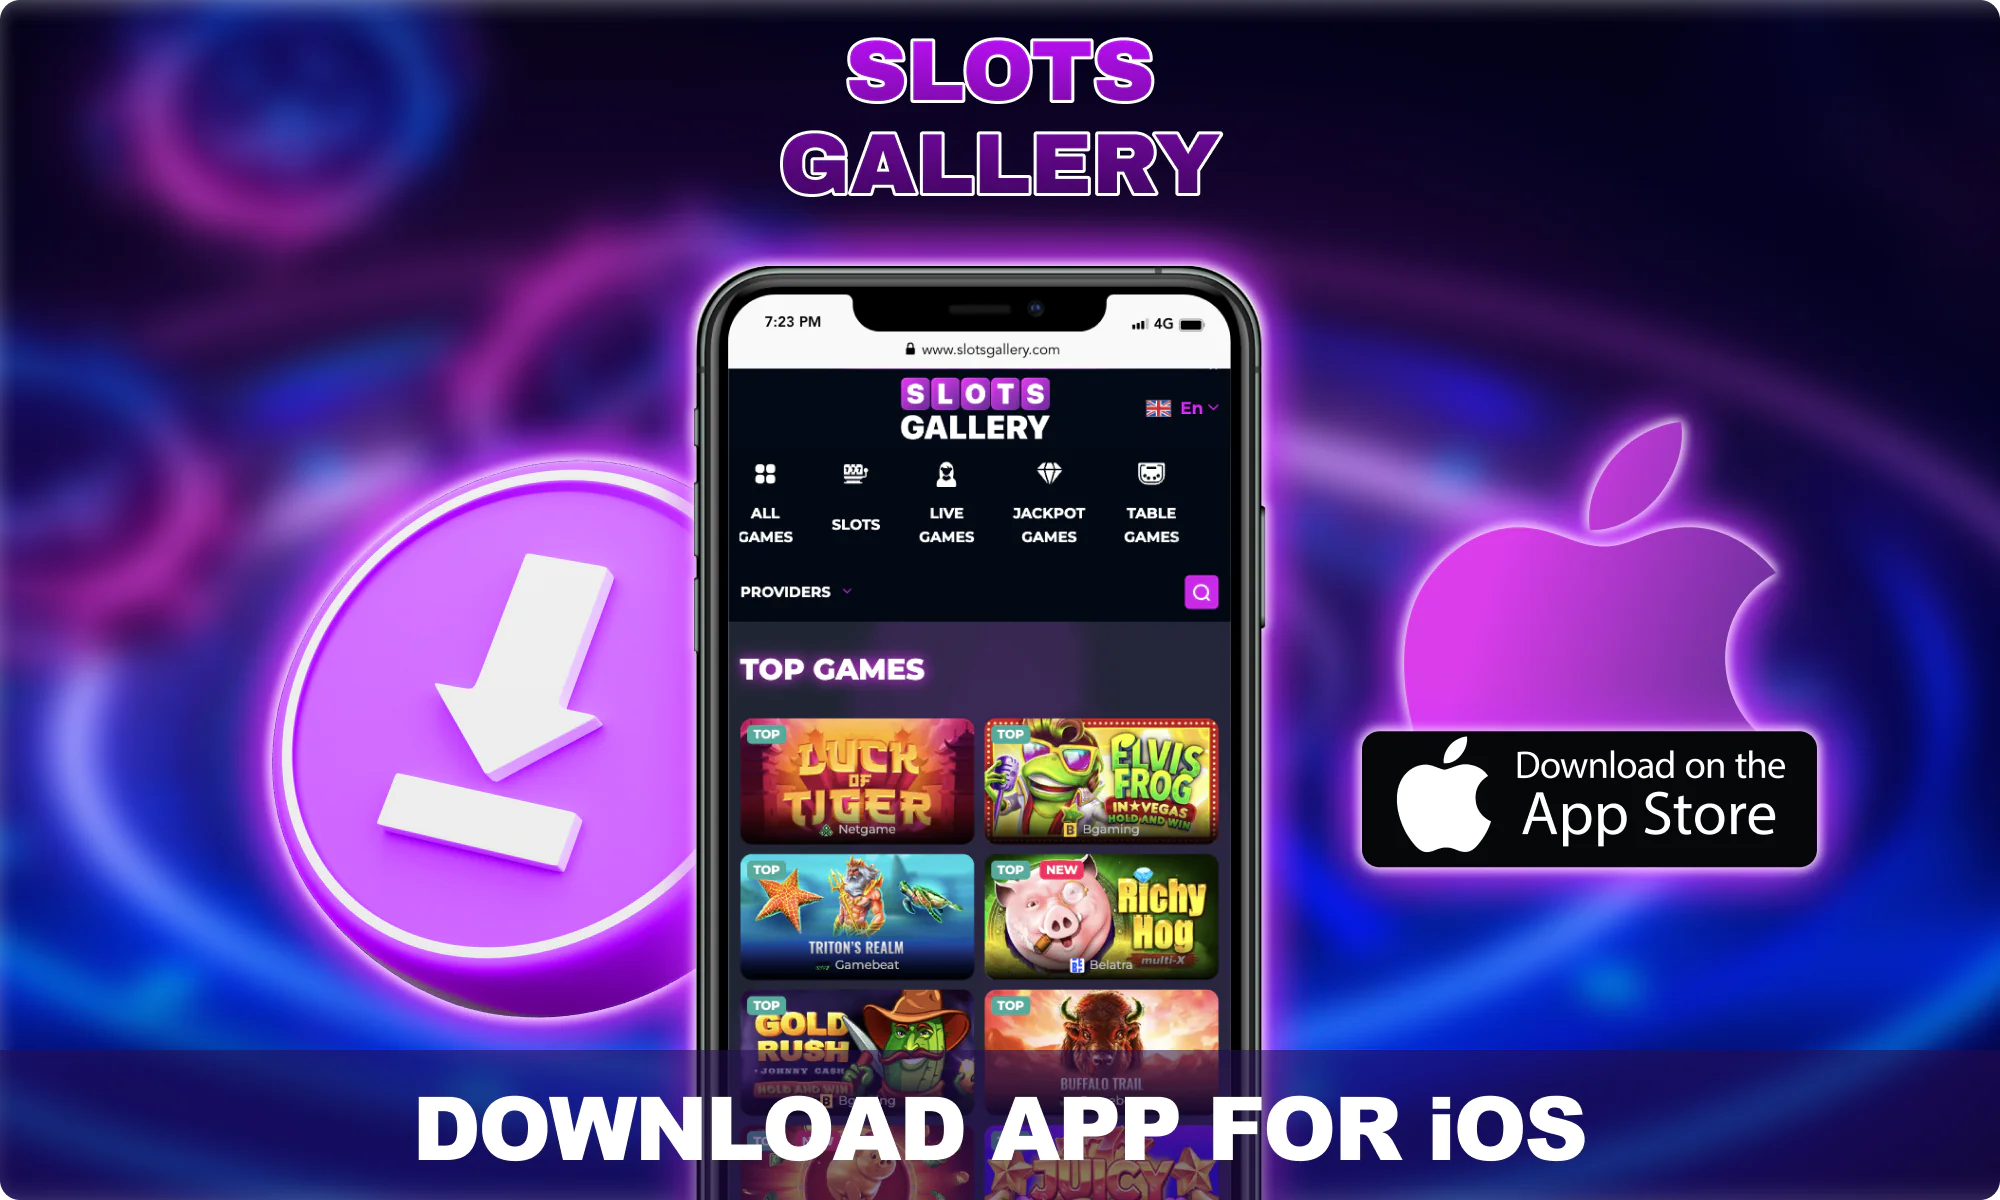 Download iOS App for Slots Gallery players